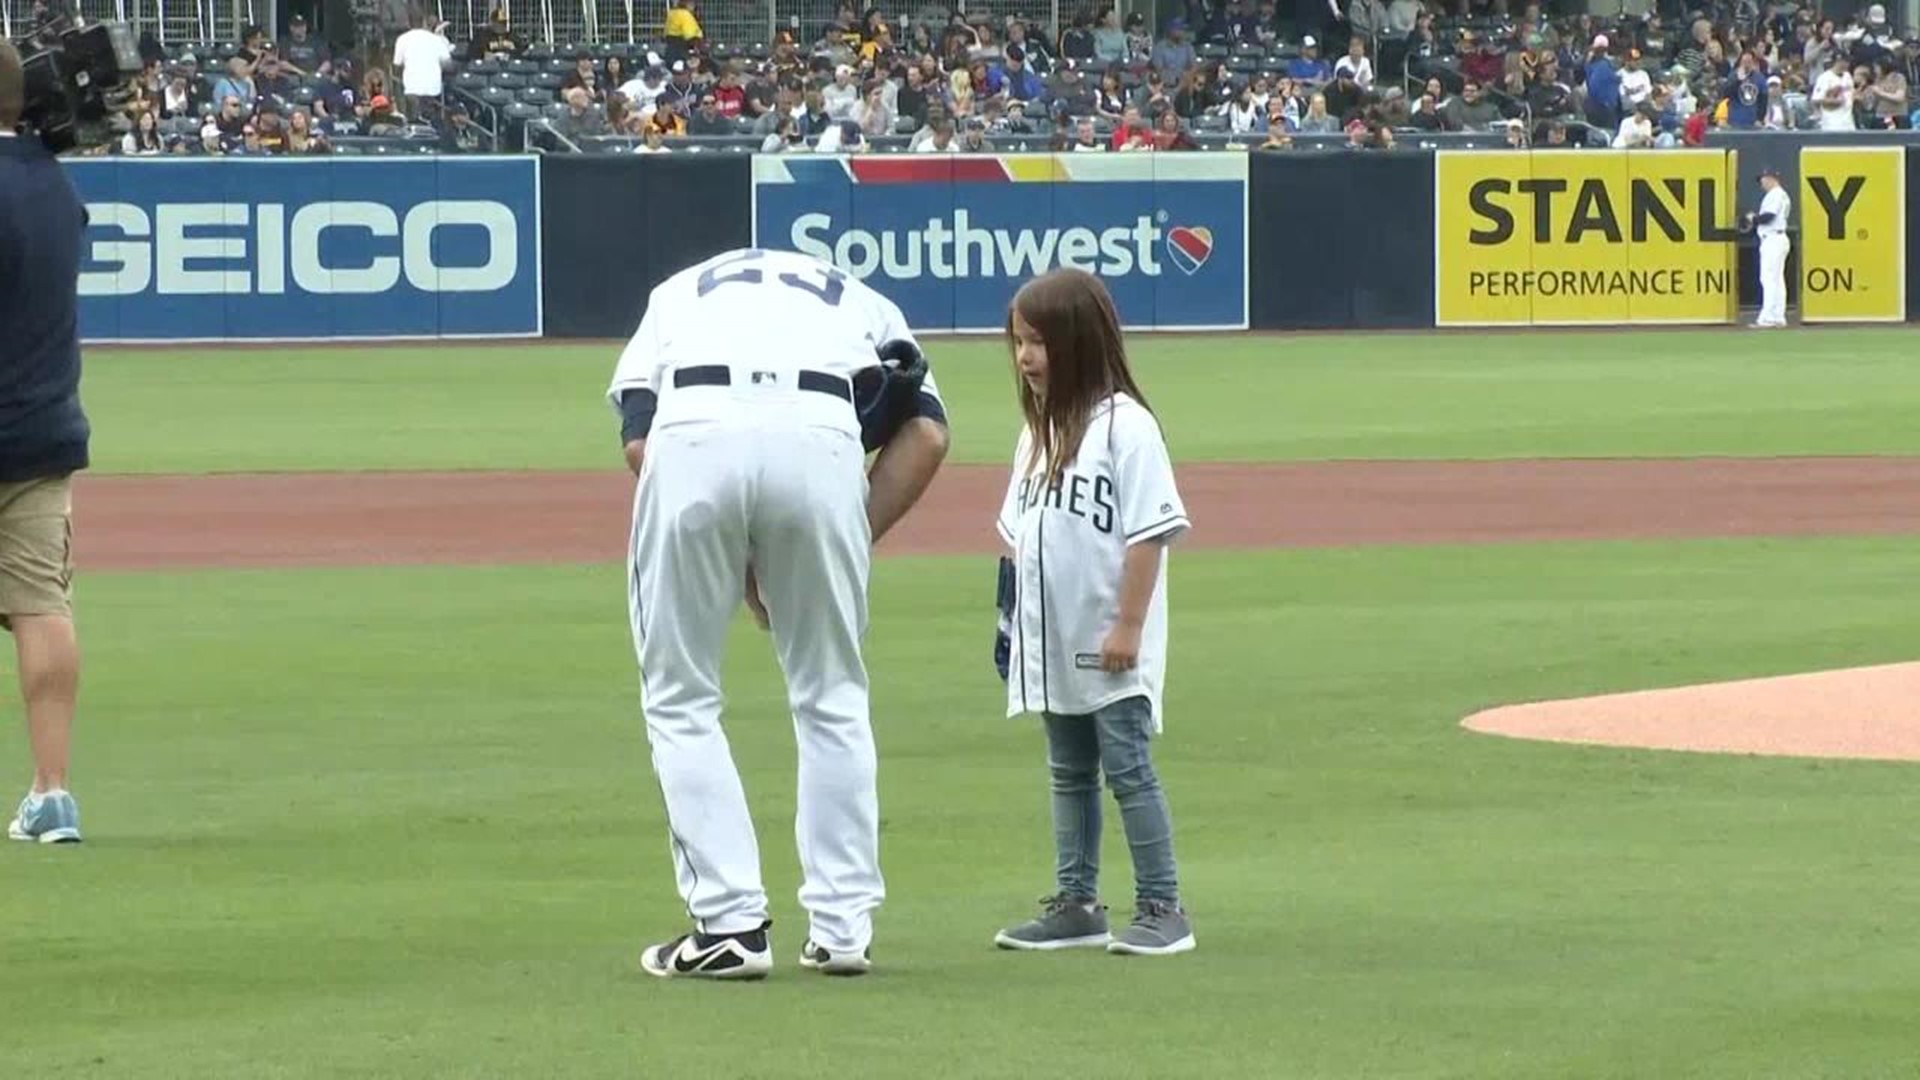 Prosthetic hand first pitch